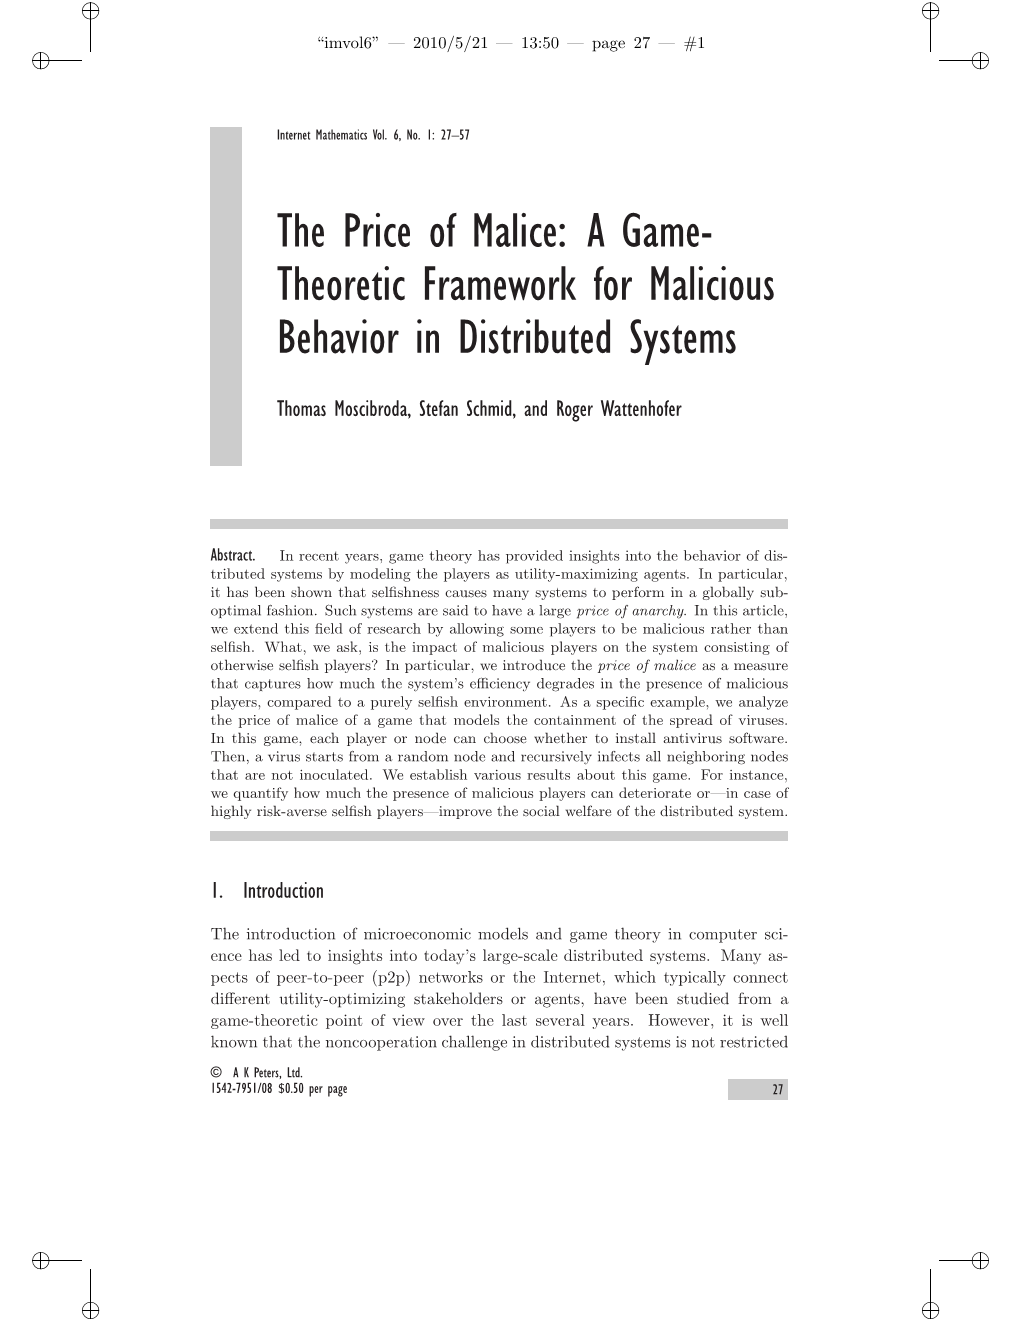 Theoretic Framework for Malicious Behavior in Distributed Systems